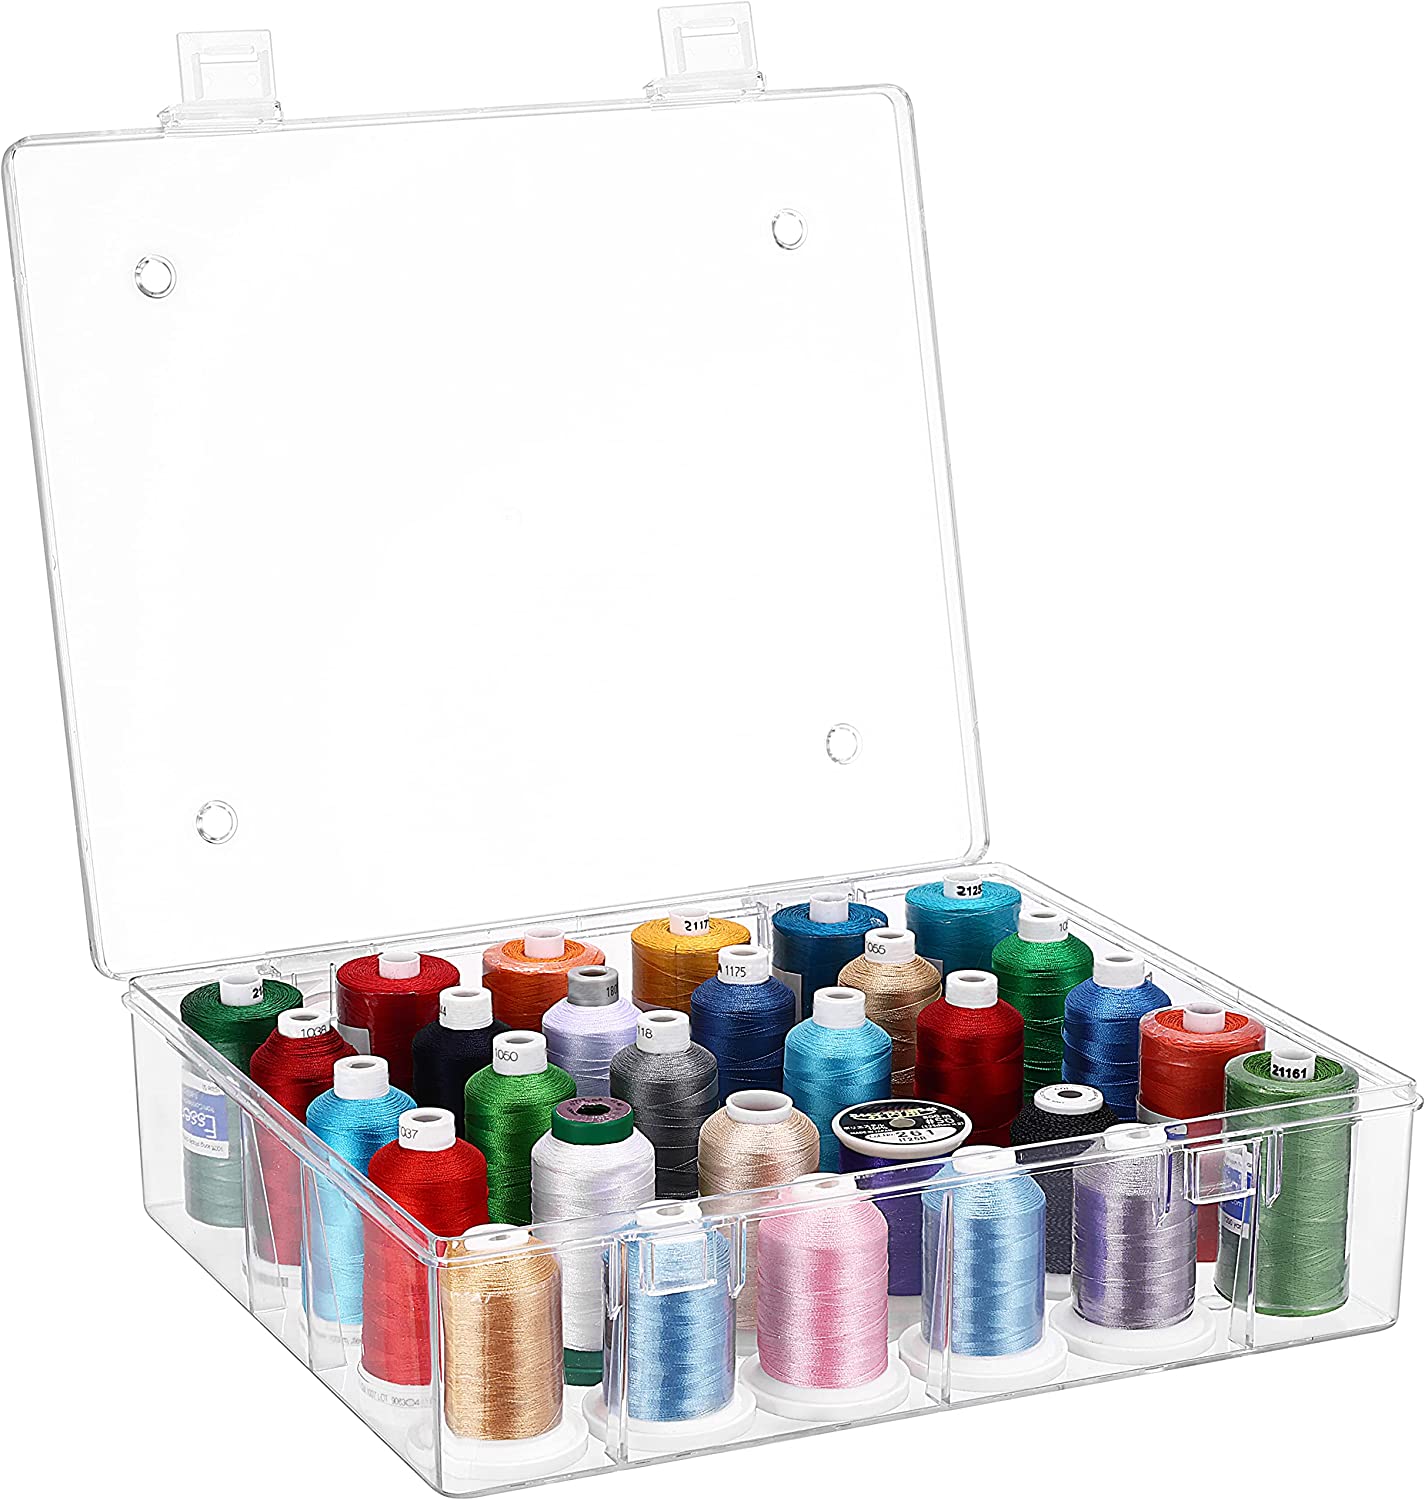 New brothread Tall and Clear Storage Box/Organizer for Holding 30 Spoo